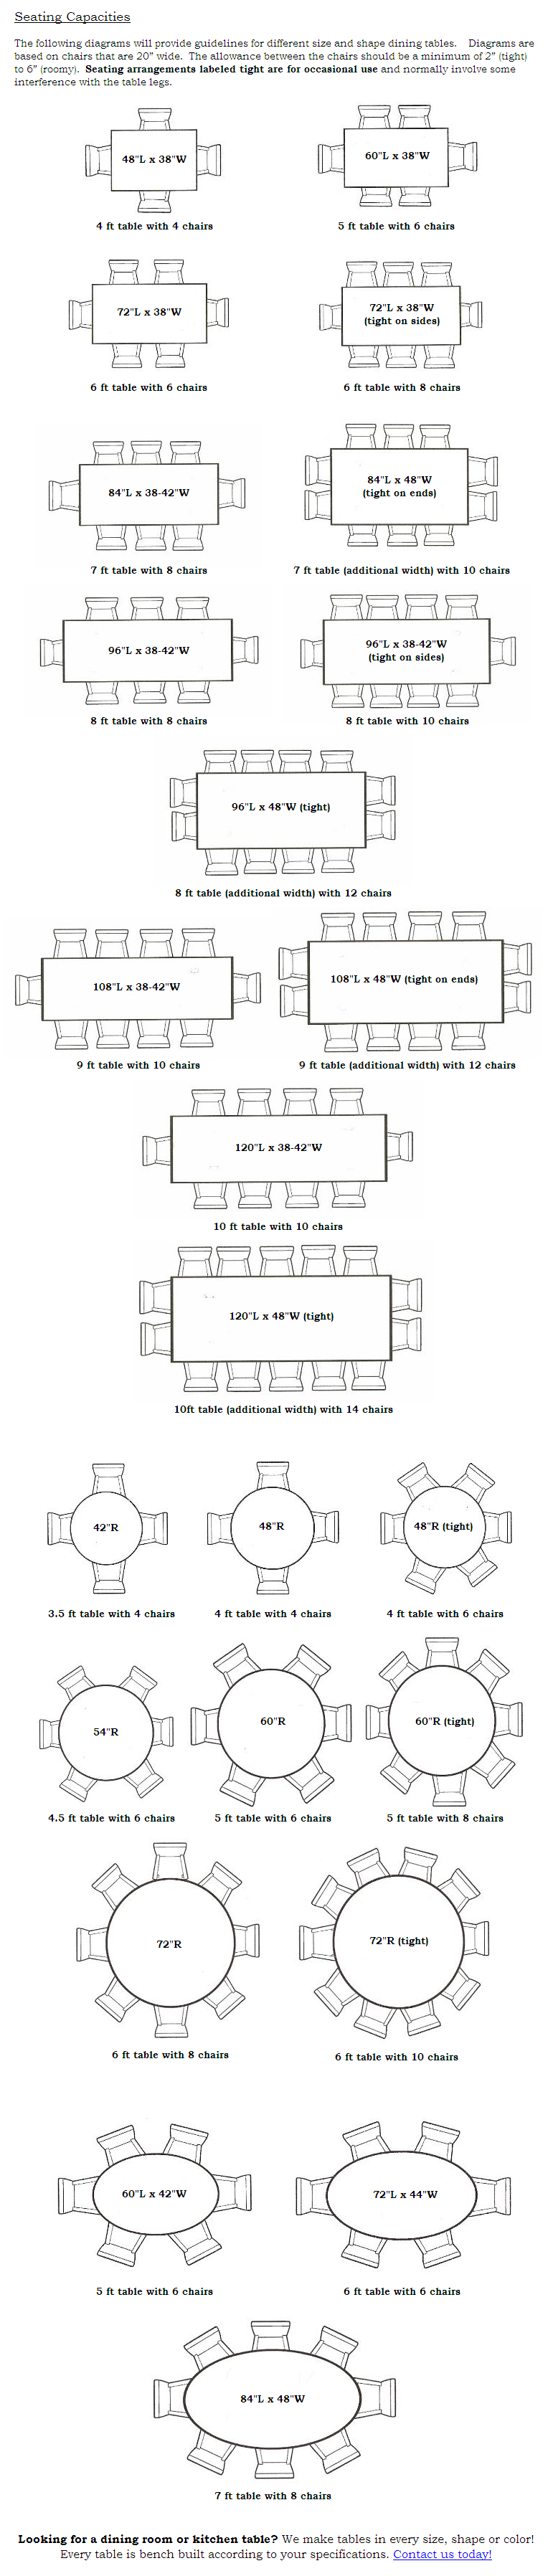 Dining Table seating capacities chart by size and shape